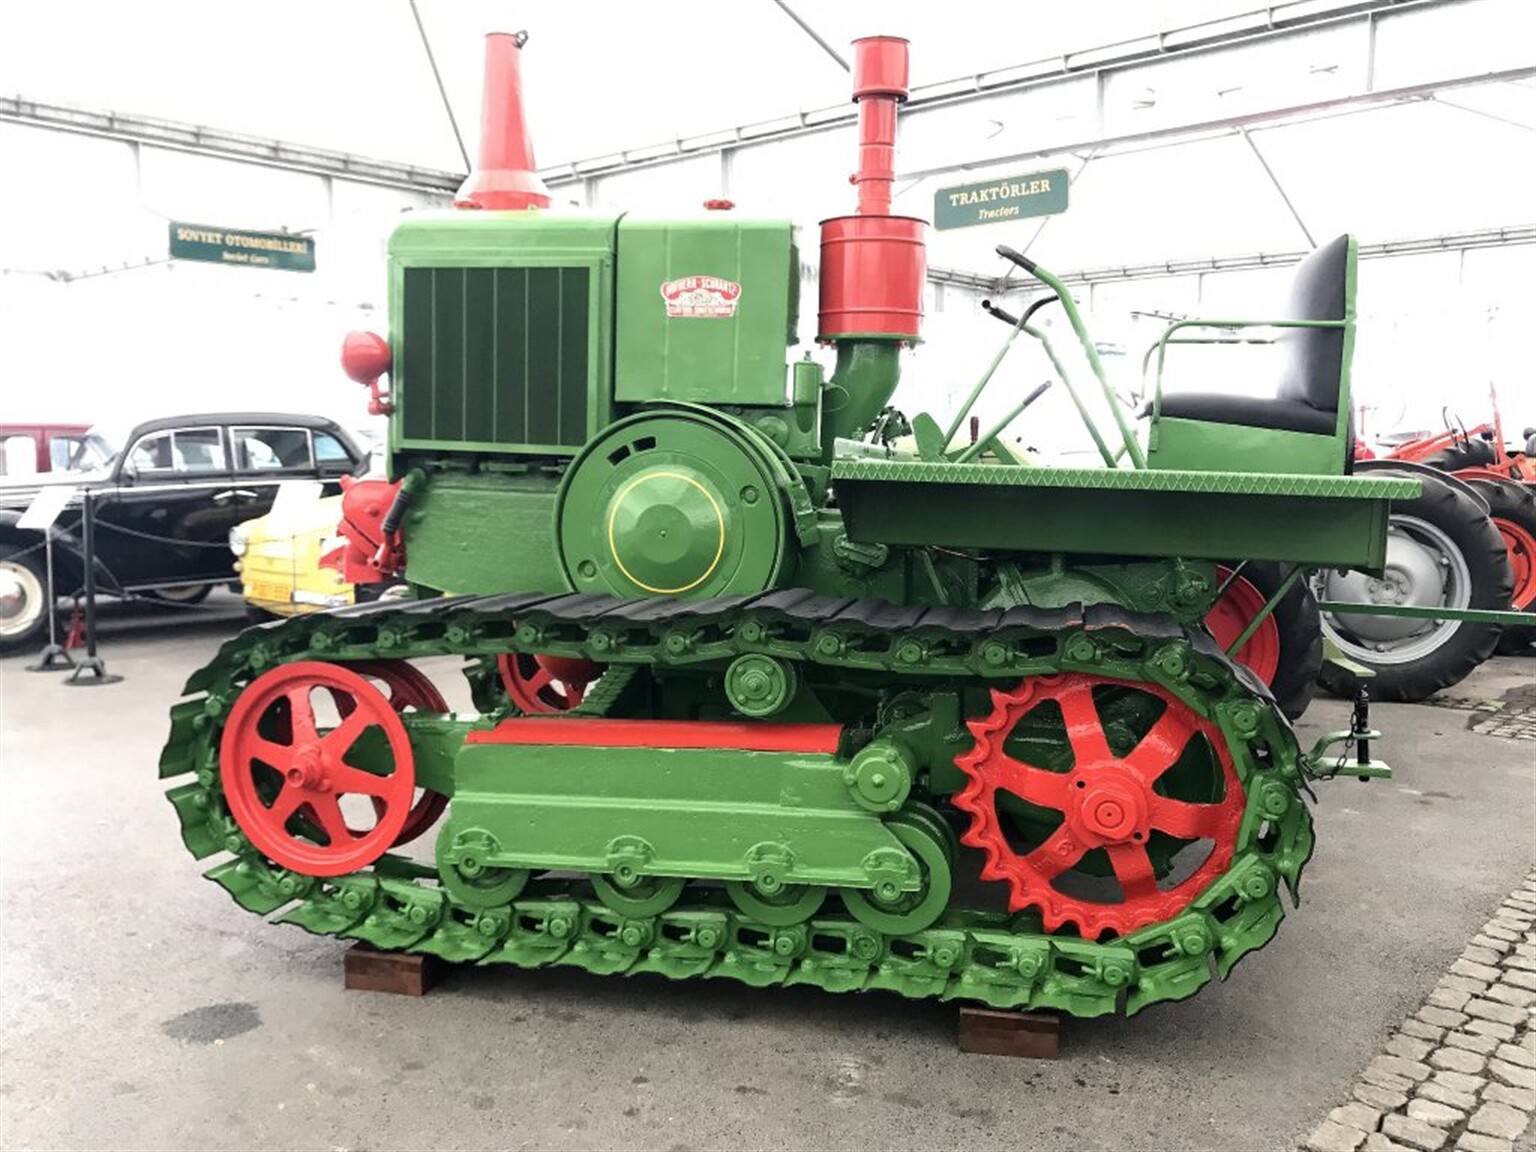 Rare Tracked Traction Engine Preserved in Turkey